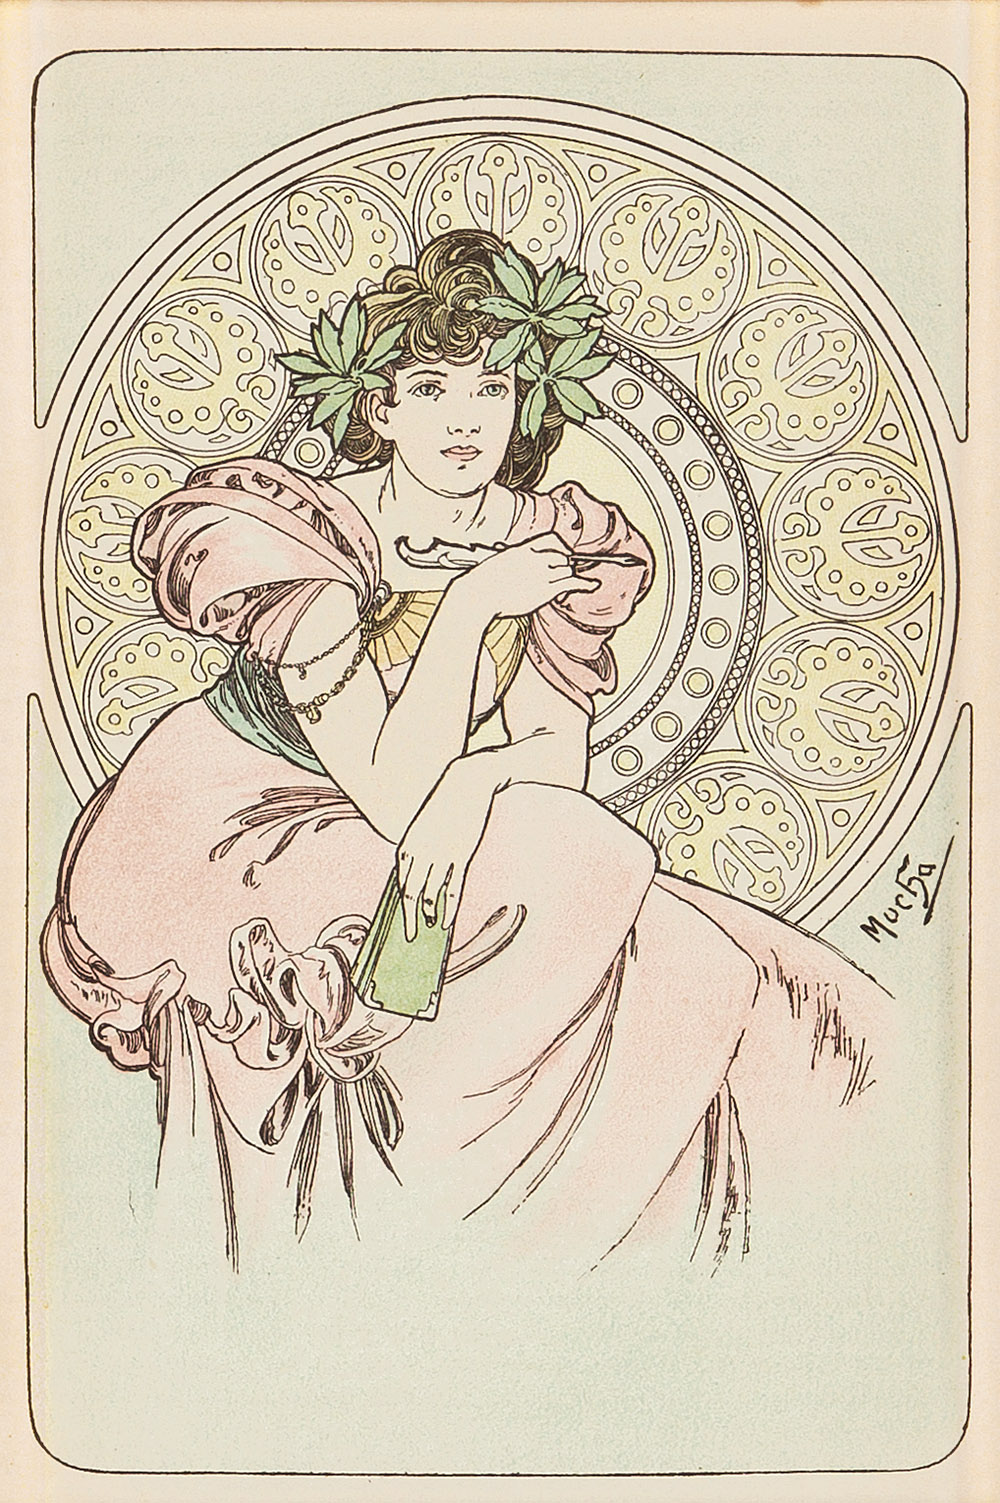 ALPHONSE MUCHA (1860-1939).  DICTIONNAIRE DES ARTS DÉCORATIFS. Two small plates. 1902. Sizes vary, each approximately 9x6 inches, 22¾x1